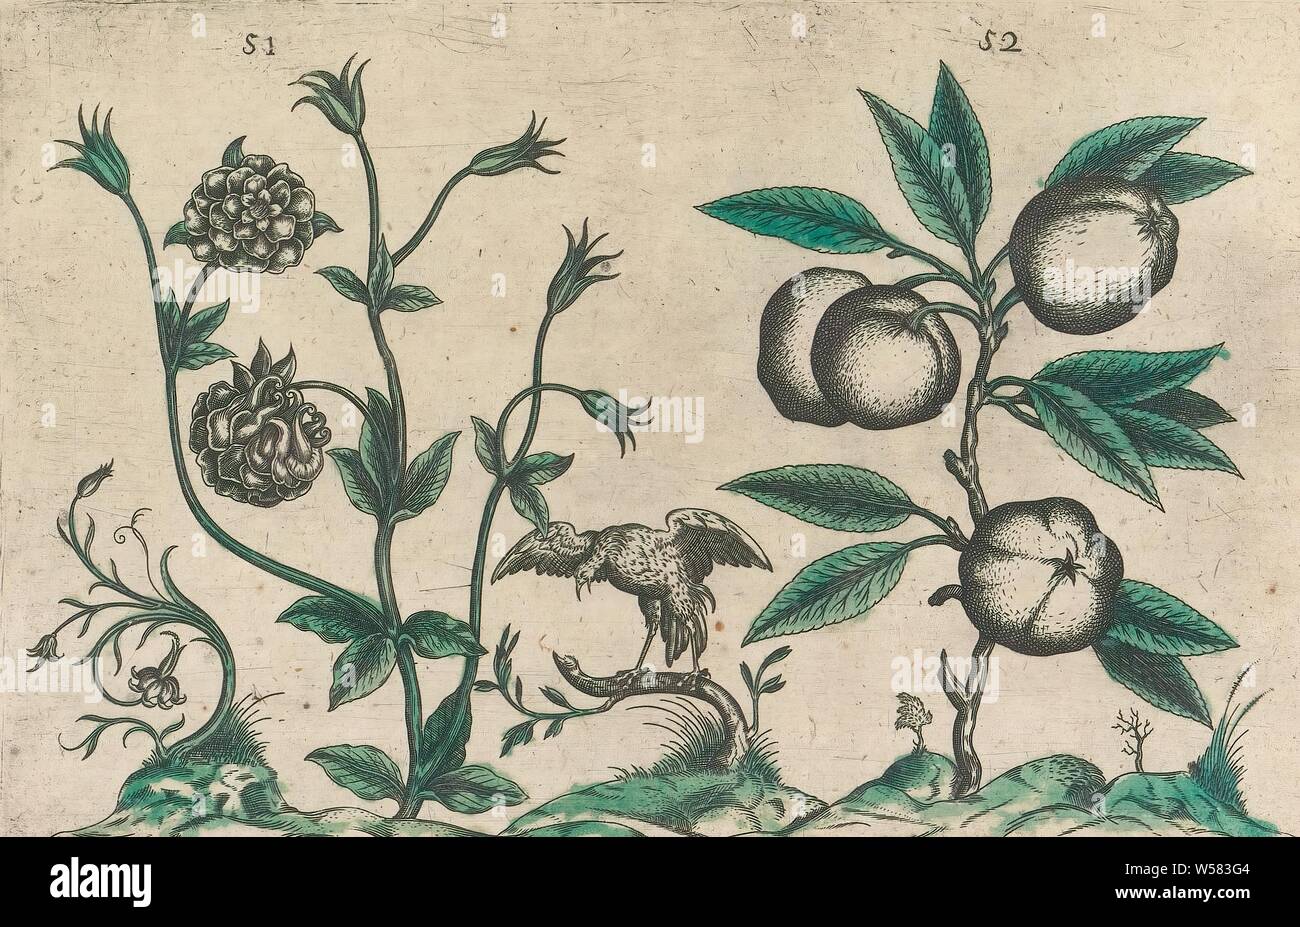 Double Columbine (Aquilegia vulgaris) and apple (Malus pumila), Double Columbine and apple. With a bird and some ornamental plants. FIGs. 51 and 52 on a sheet hand numbered 26. In: Anselmi Boetii de Boot I.C. Brugensis, anonymous, 1604 - 1632 and/or 1640, paper, ink, watercolor (paint), engraving, h 135 mm × w 205 mm h 160 mm × w 230 mm Stock Photo